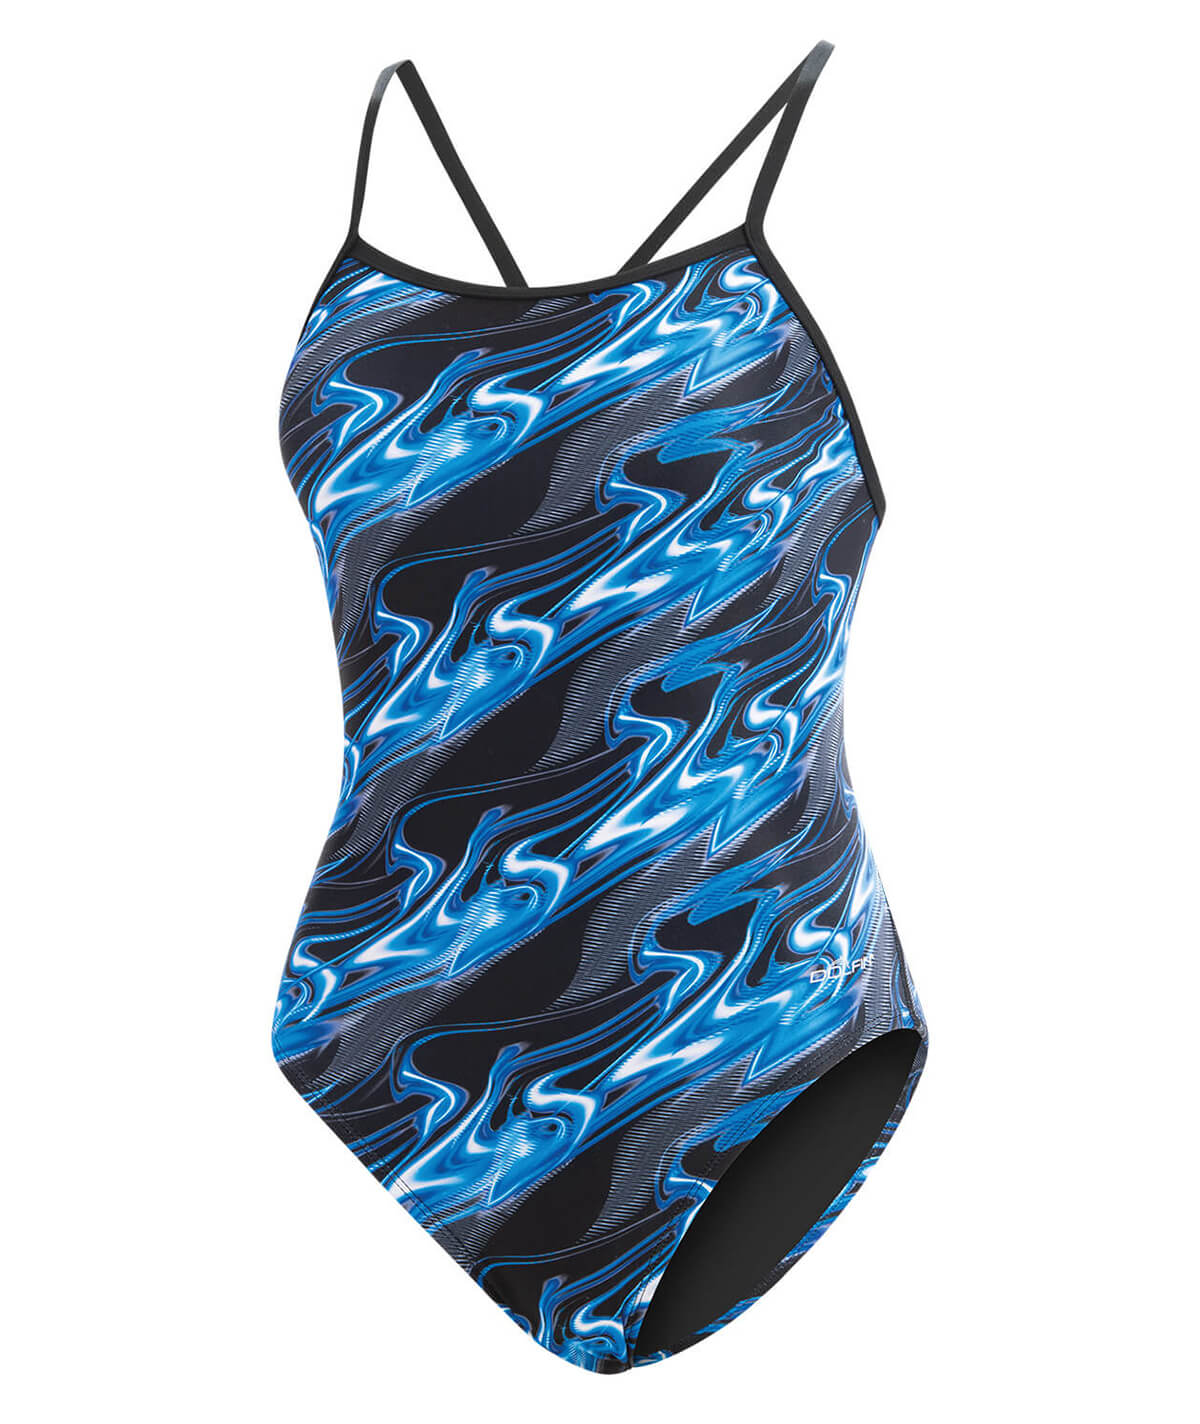 Women's Reliance Inferno V-Back One Piece Swimsuit